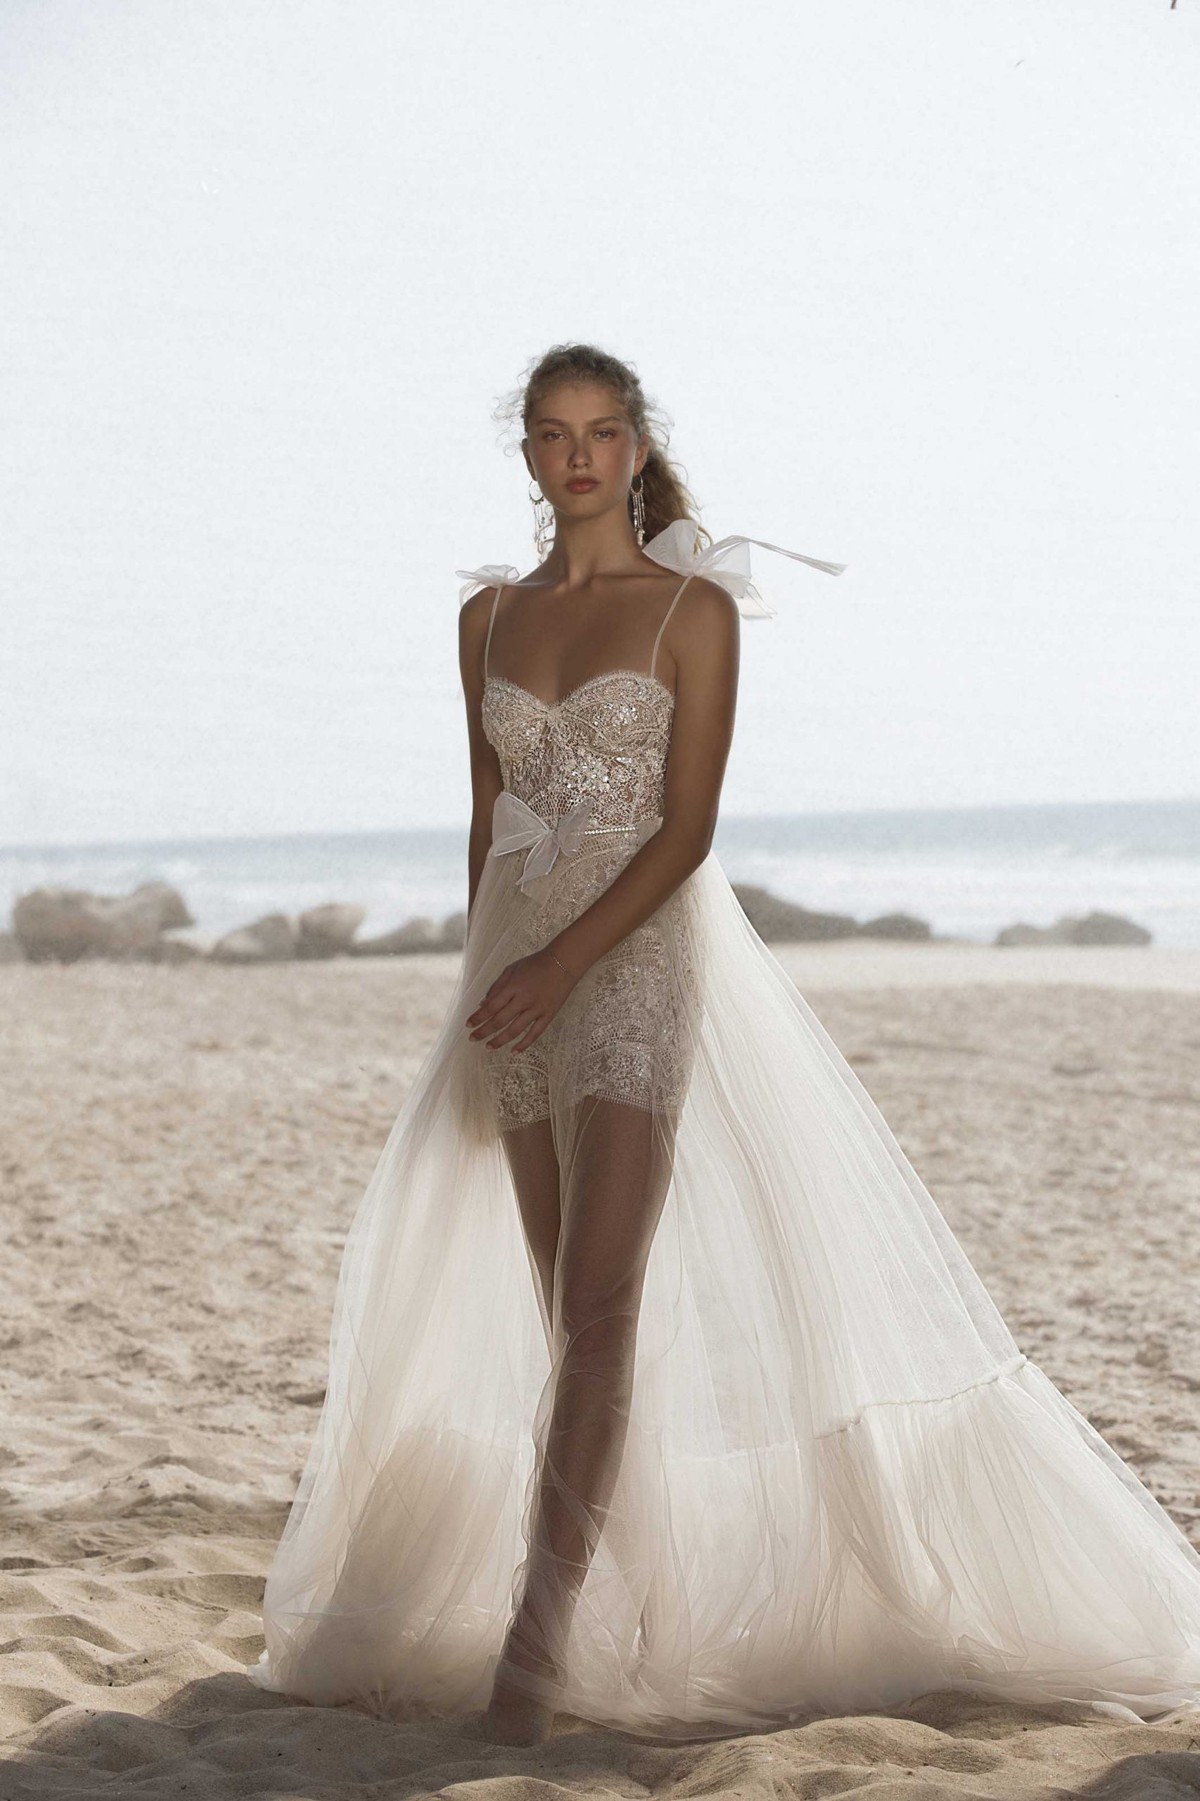 21-HAYDEN Bridal Dress Inspirated By Berta Muse 2021 Vista Mare Collection